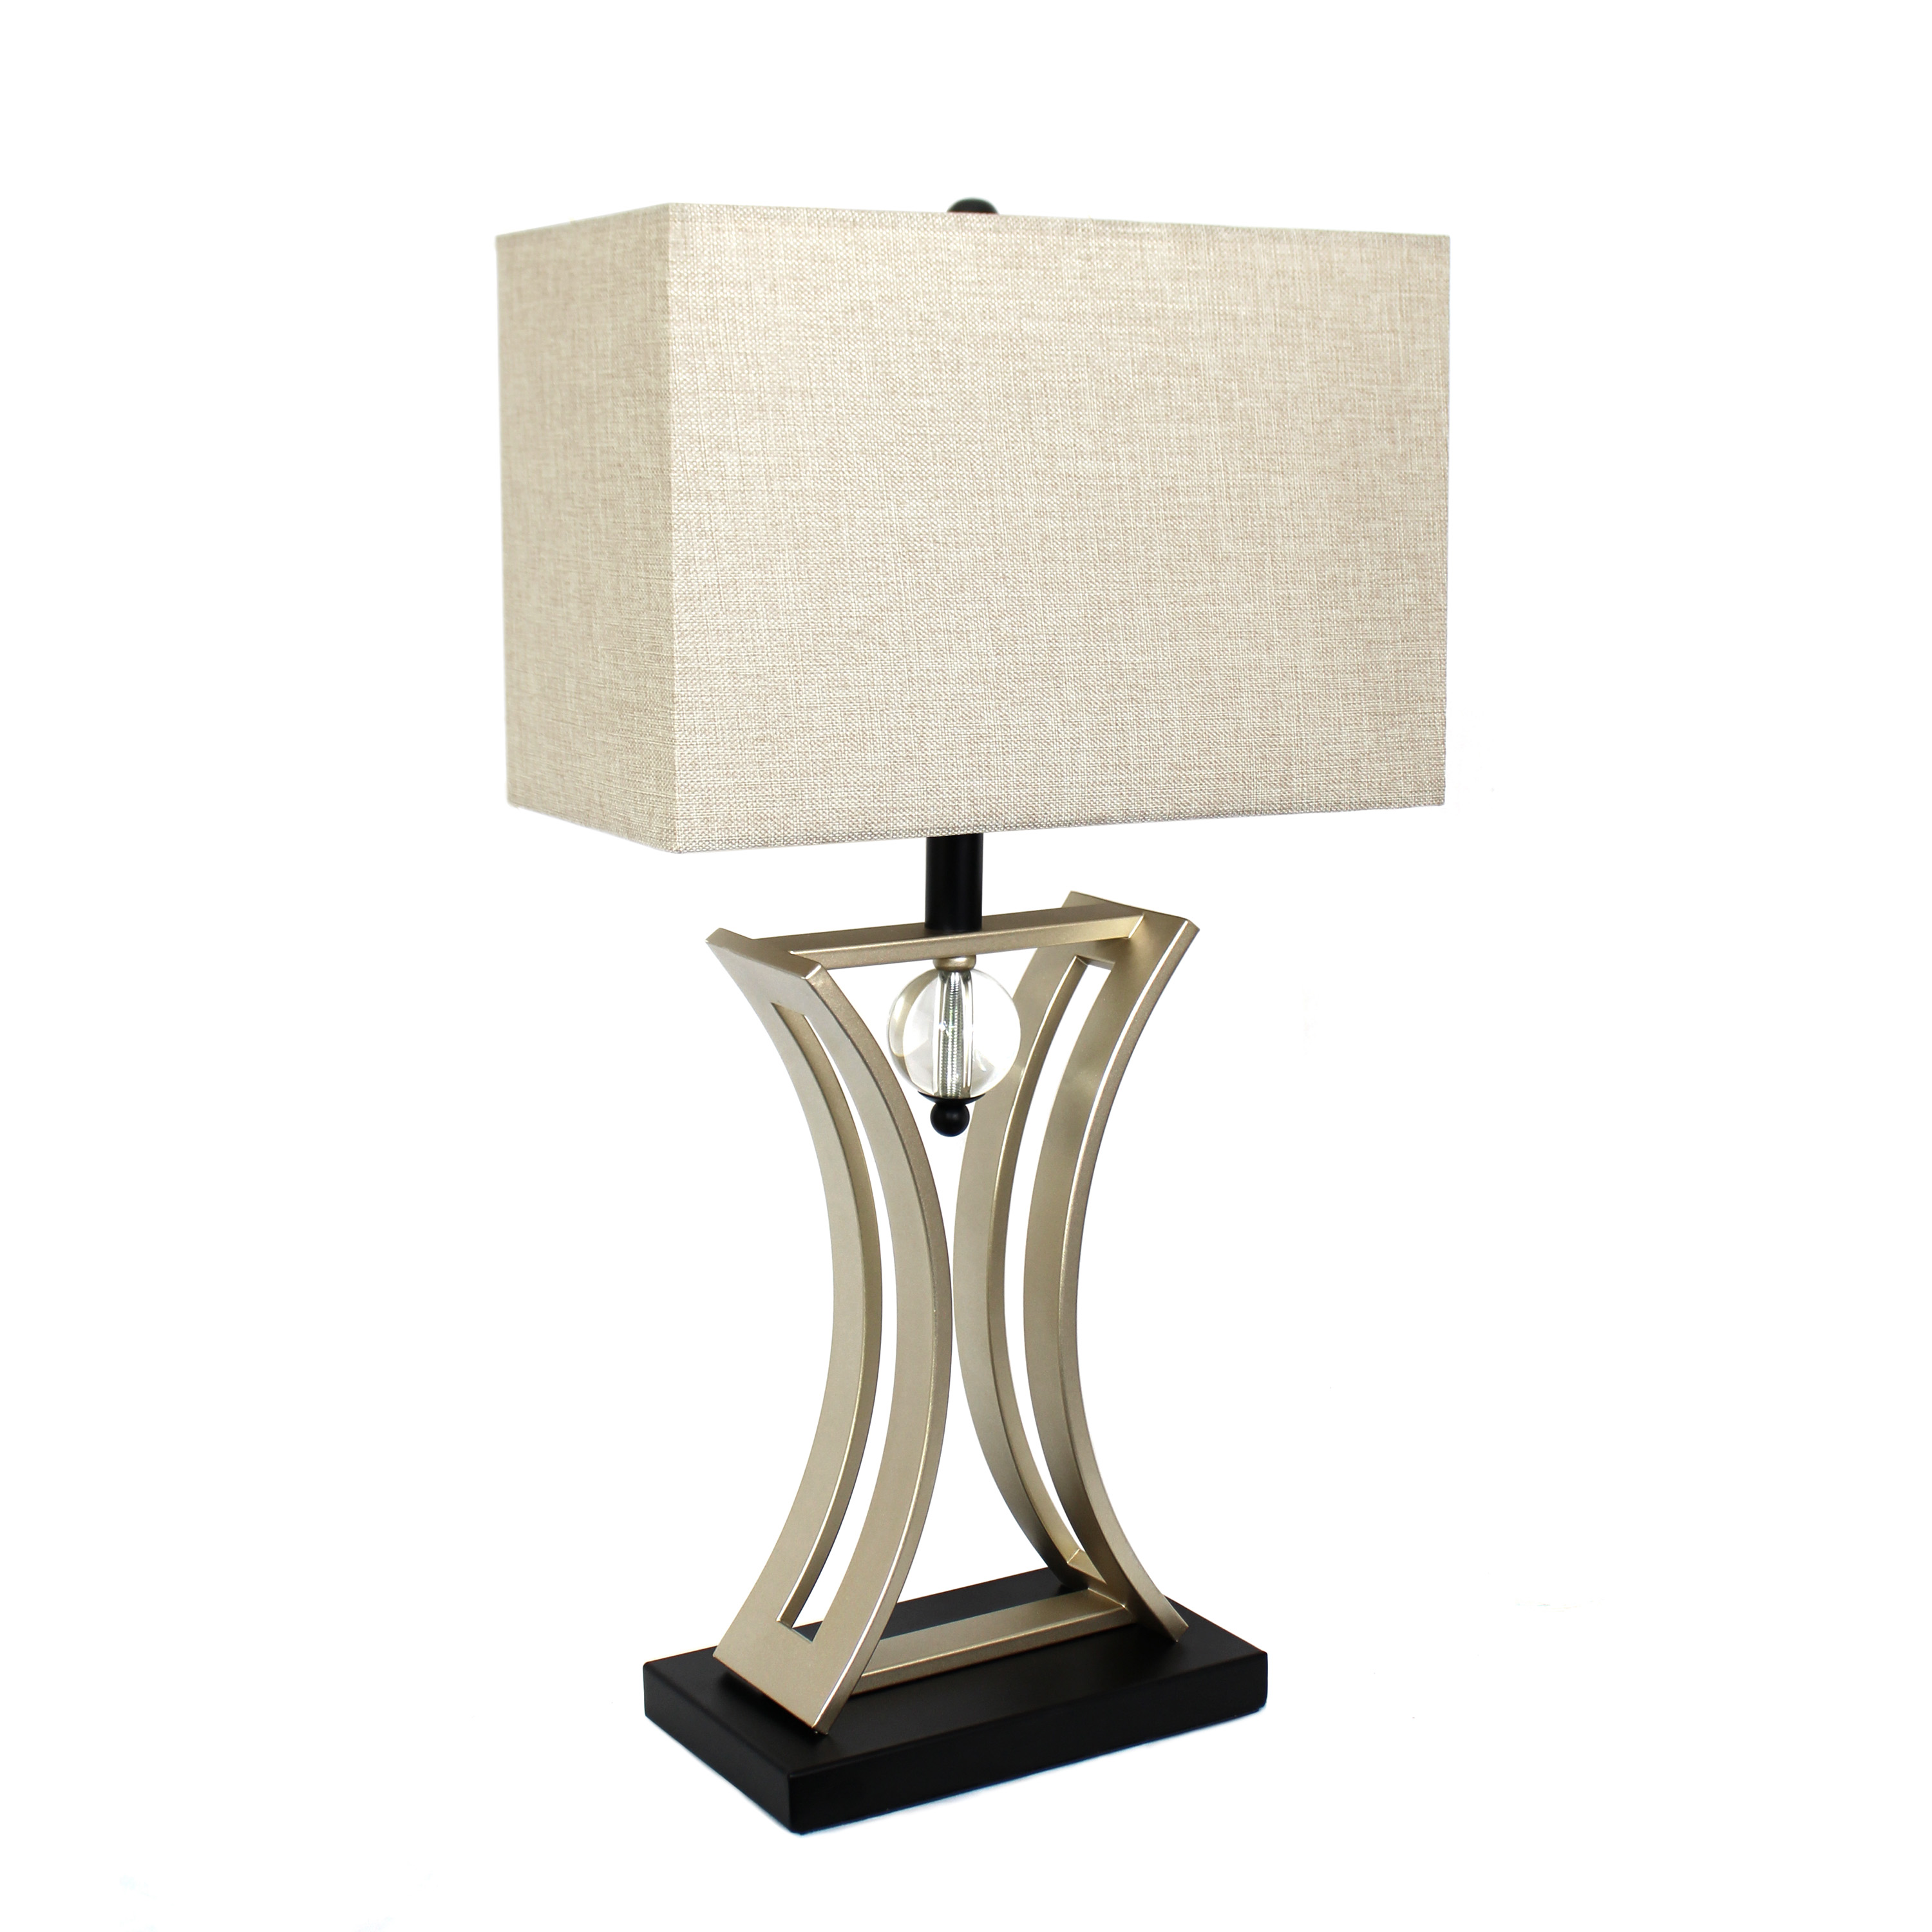 Elegant Designs Chrome & Black Conference Room Hourglass Shape with Pendulum Table Lamp